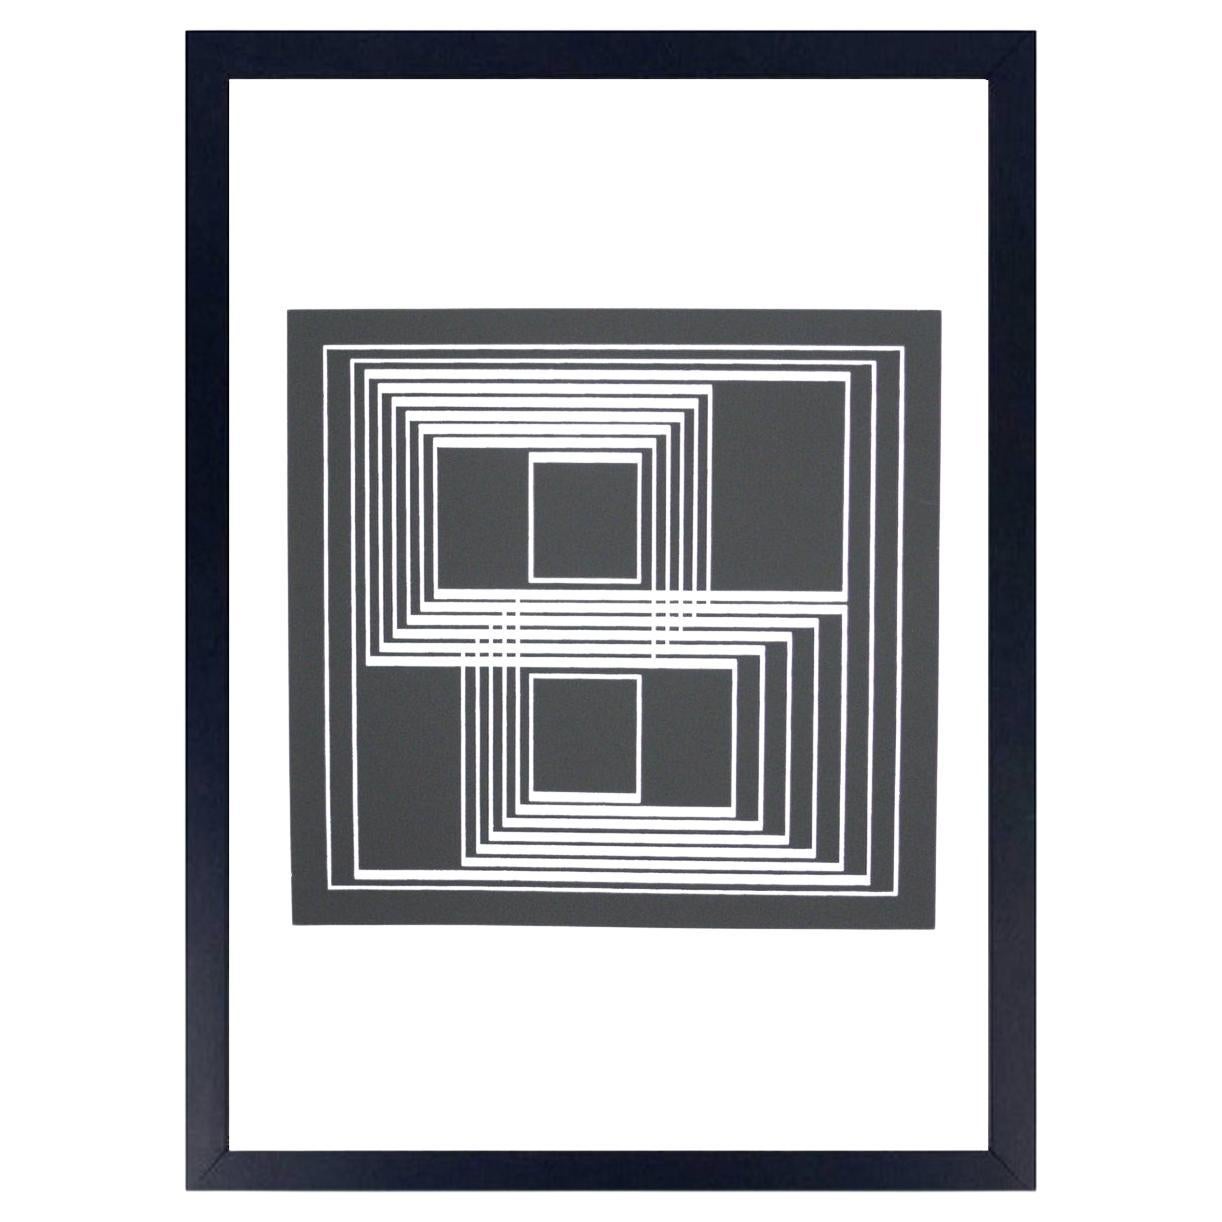 Josef Albers Signed Abstract Screenprint "Seclusion"